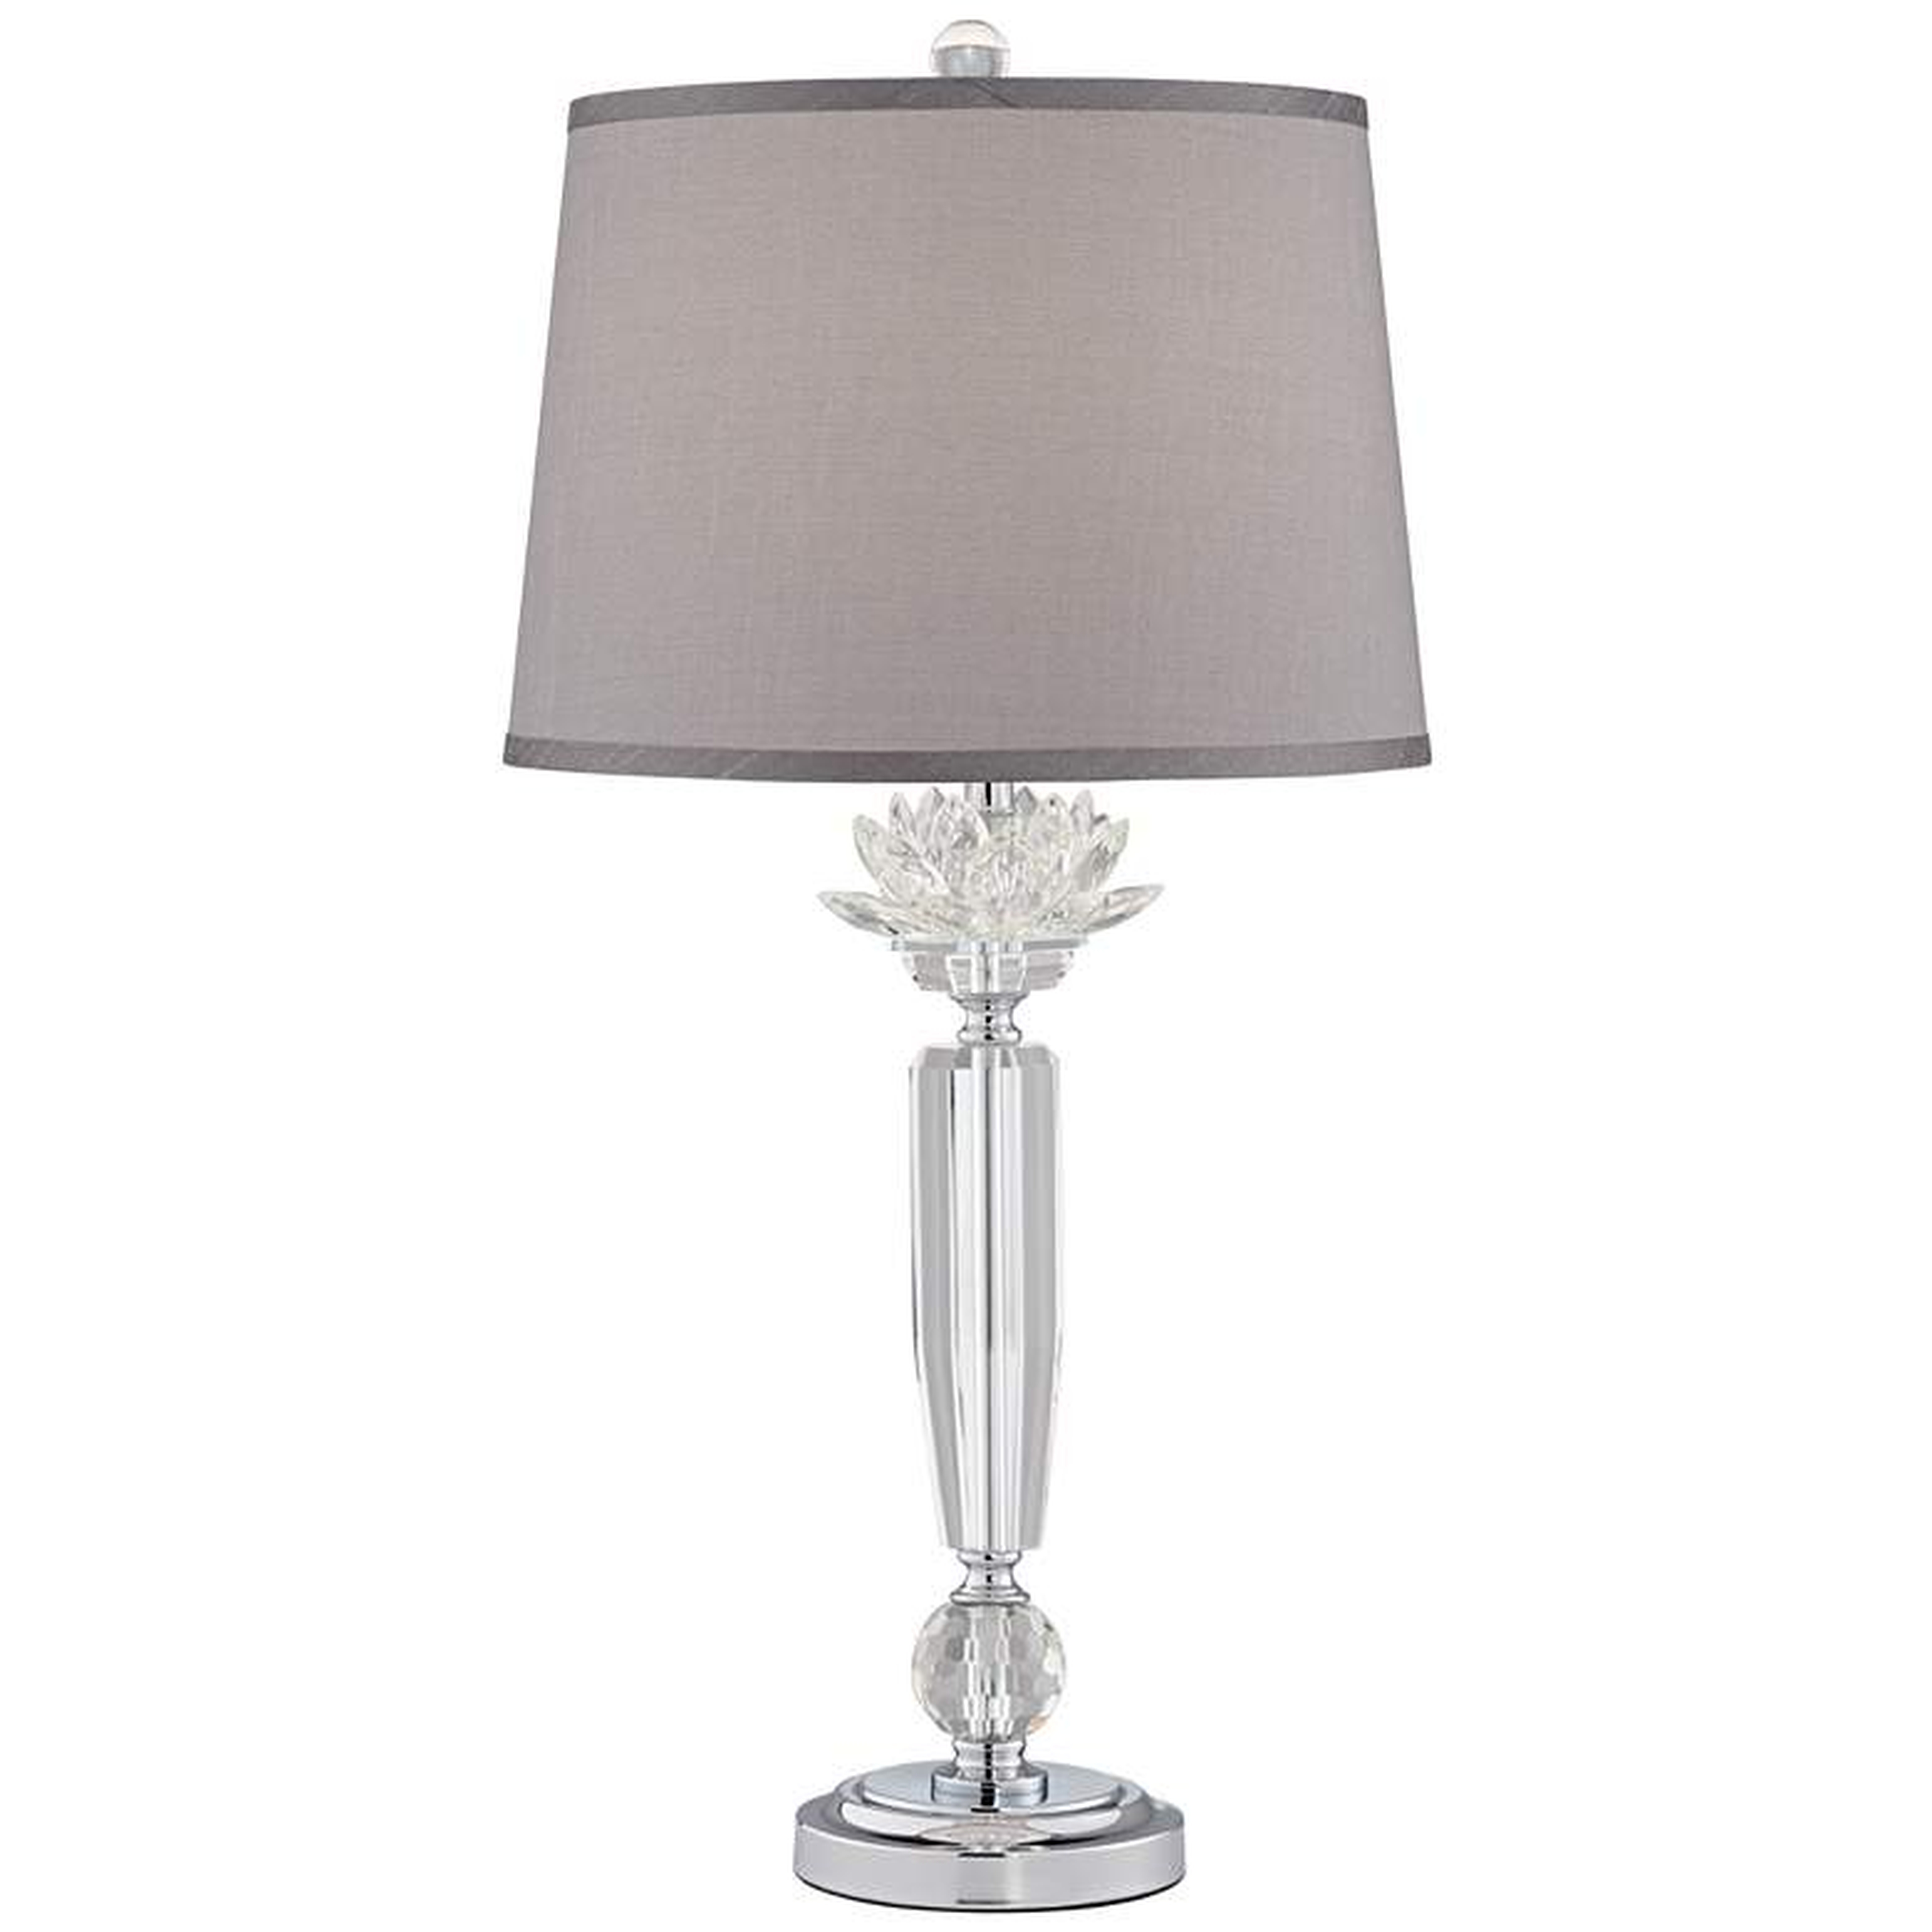 Olivia Crystal Table Lamp with Gray Shade - Style # 53X56 - Lamps Plus